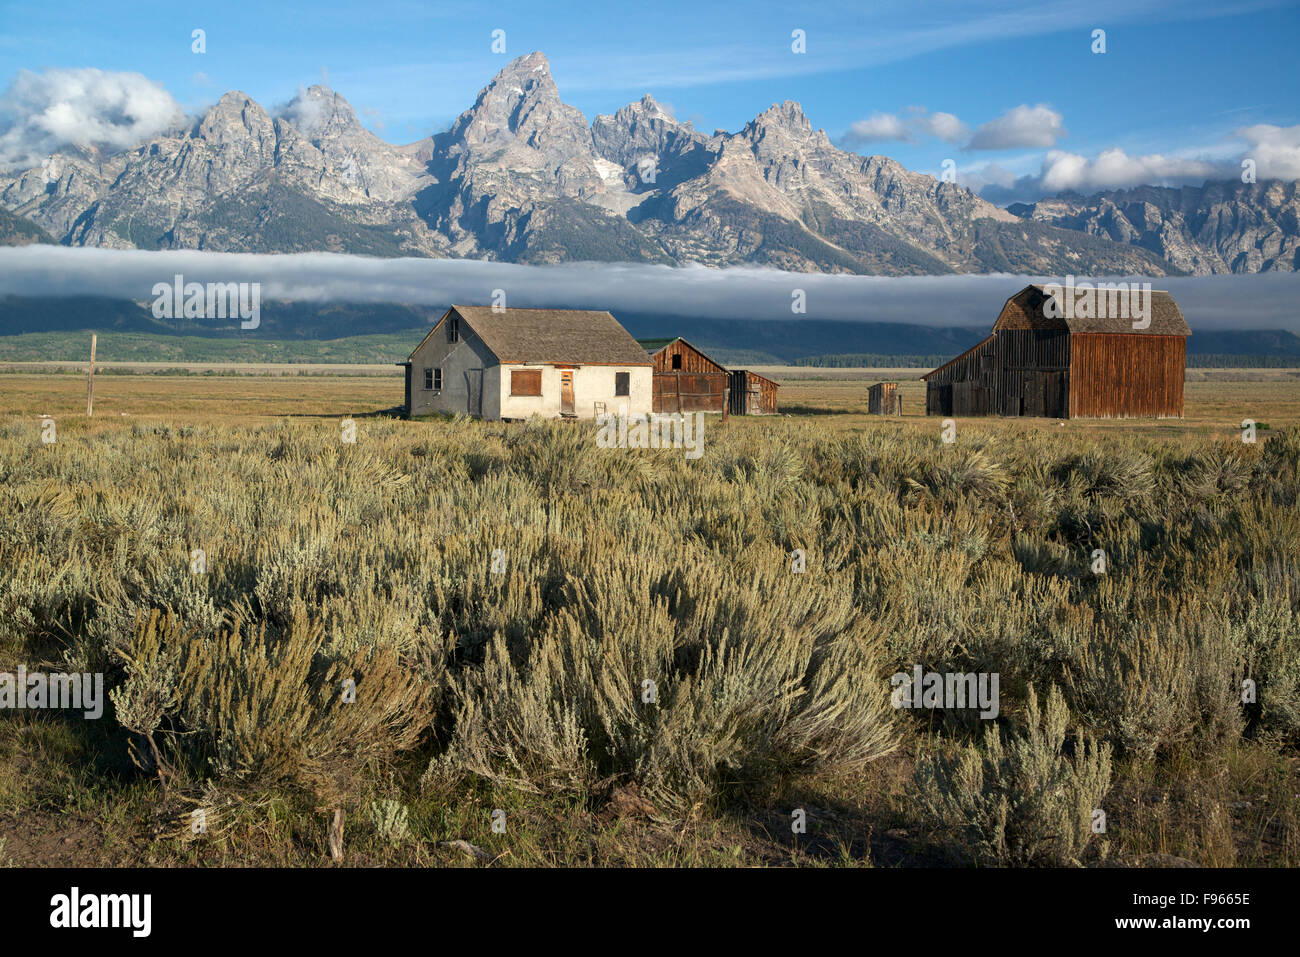 Scenic of Teton Mountain Range and historic buildings from the T.A. Moulton Ranch on Mormon Row in Grand Teton National Park, Stock Photo